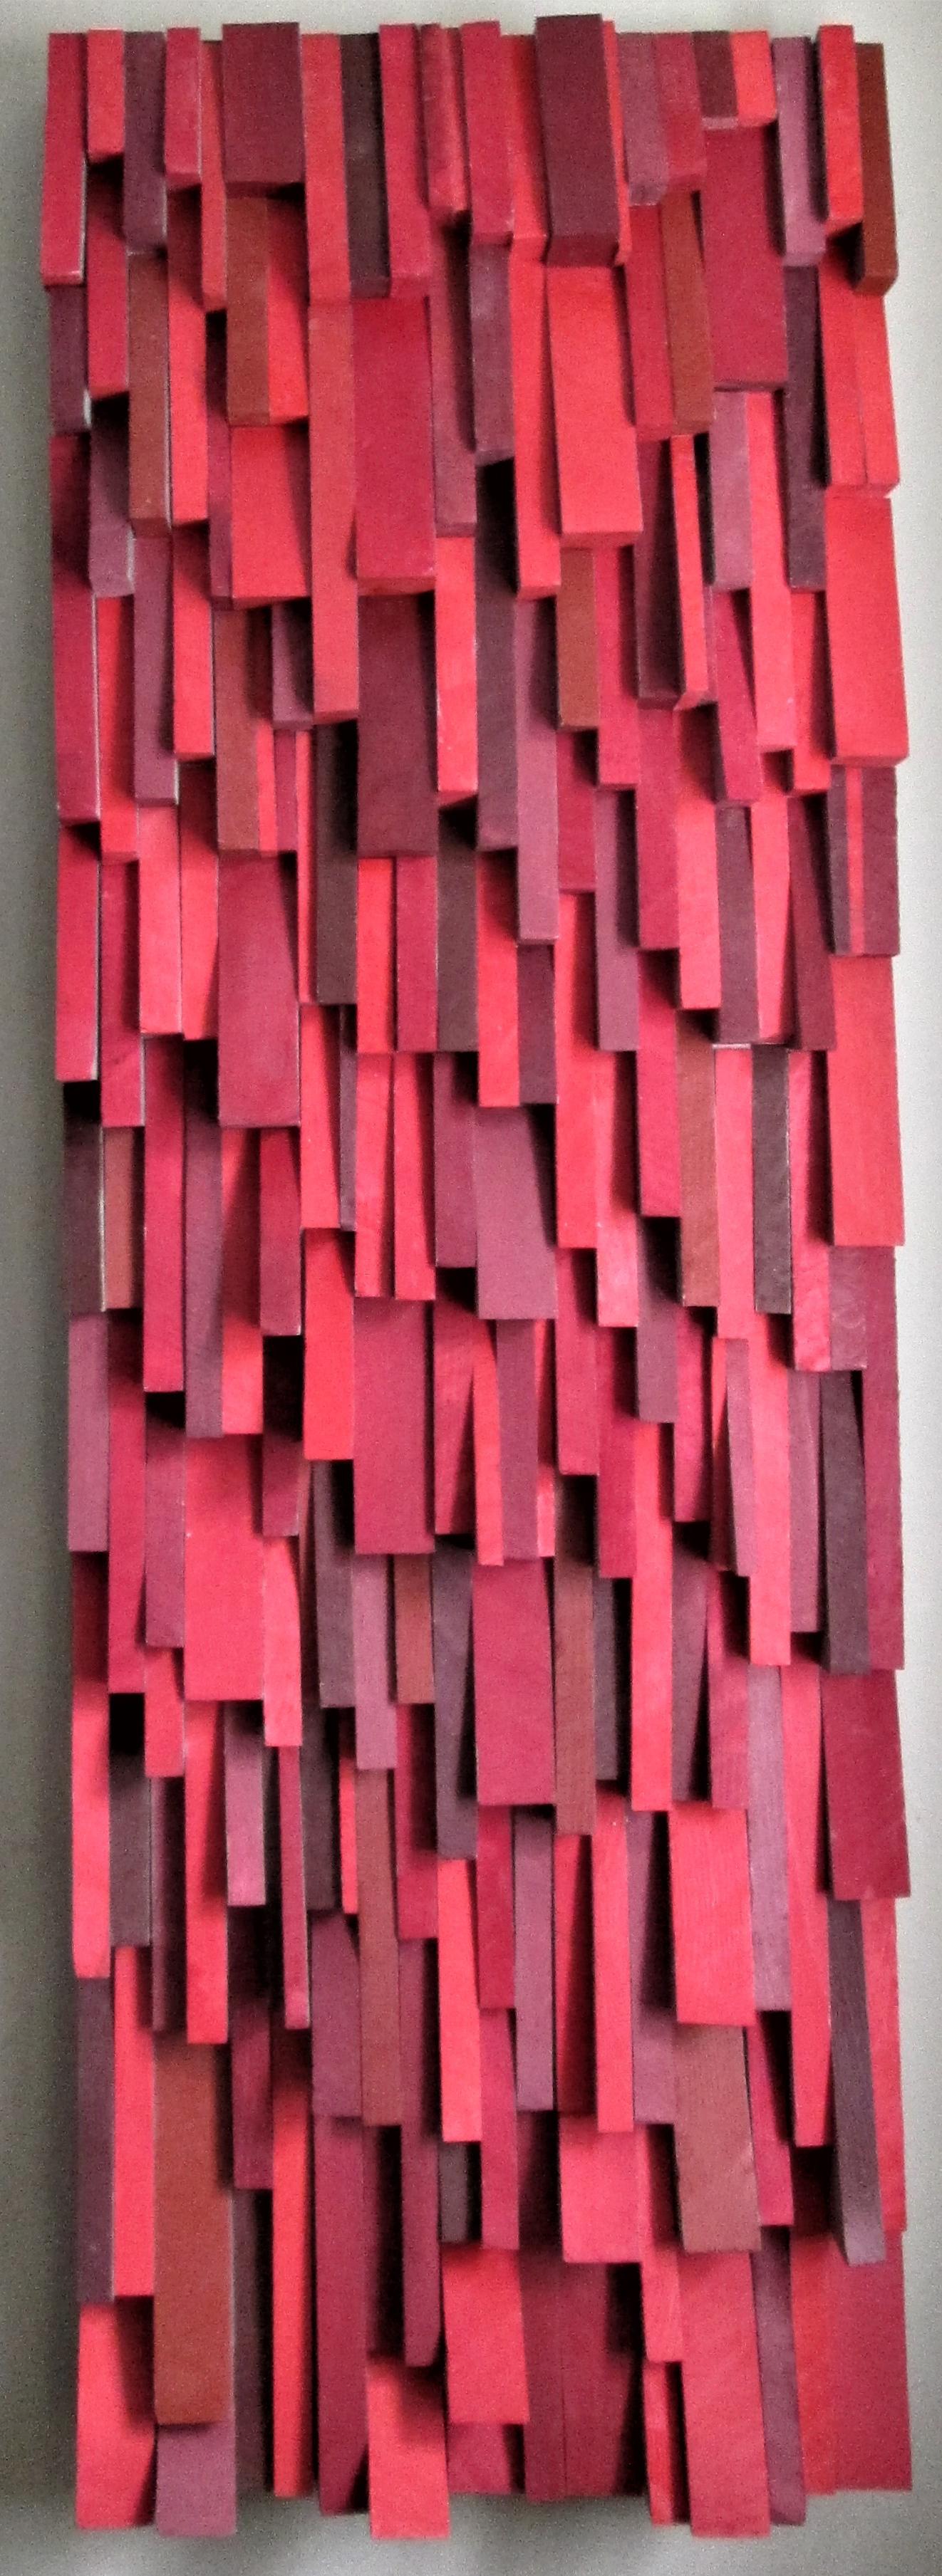 Stephen Walling Abstract Sculpture - Firefall (Abstract Three Dimensional Wood Wall Sculpture in Bright Red & Gray)